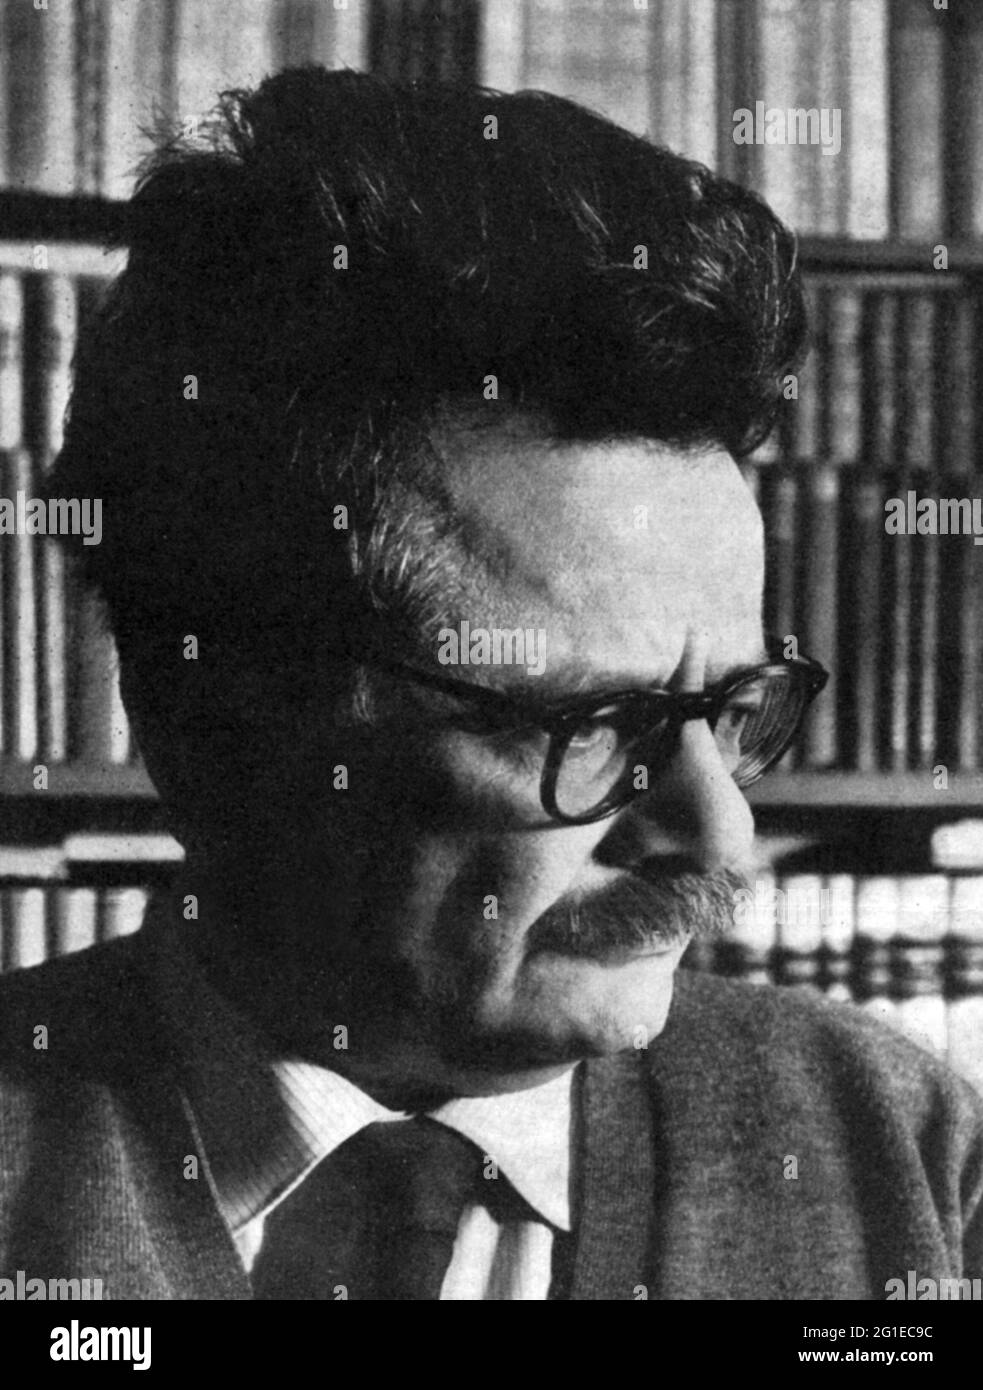 Canetti, Elias, 25.7.1905 - 14.8.1994, German author / writer, portrait, 1970s, ADDITIONAL-RIGHTS-CLEARANCE-INFO-NOT-AVAILABLE Stock Photo